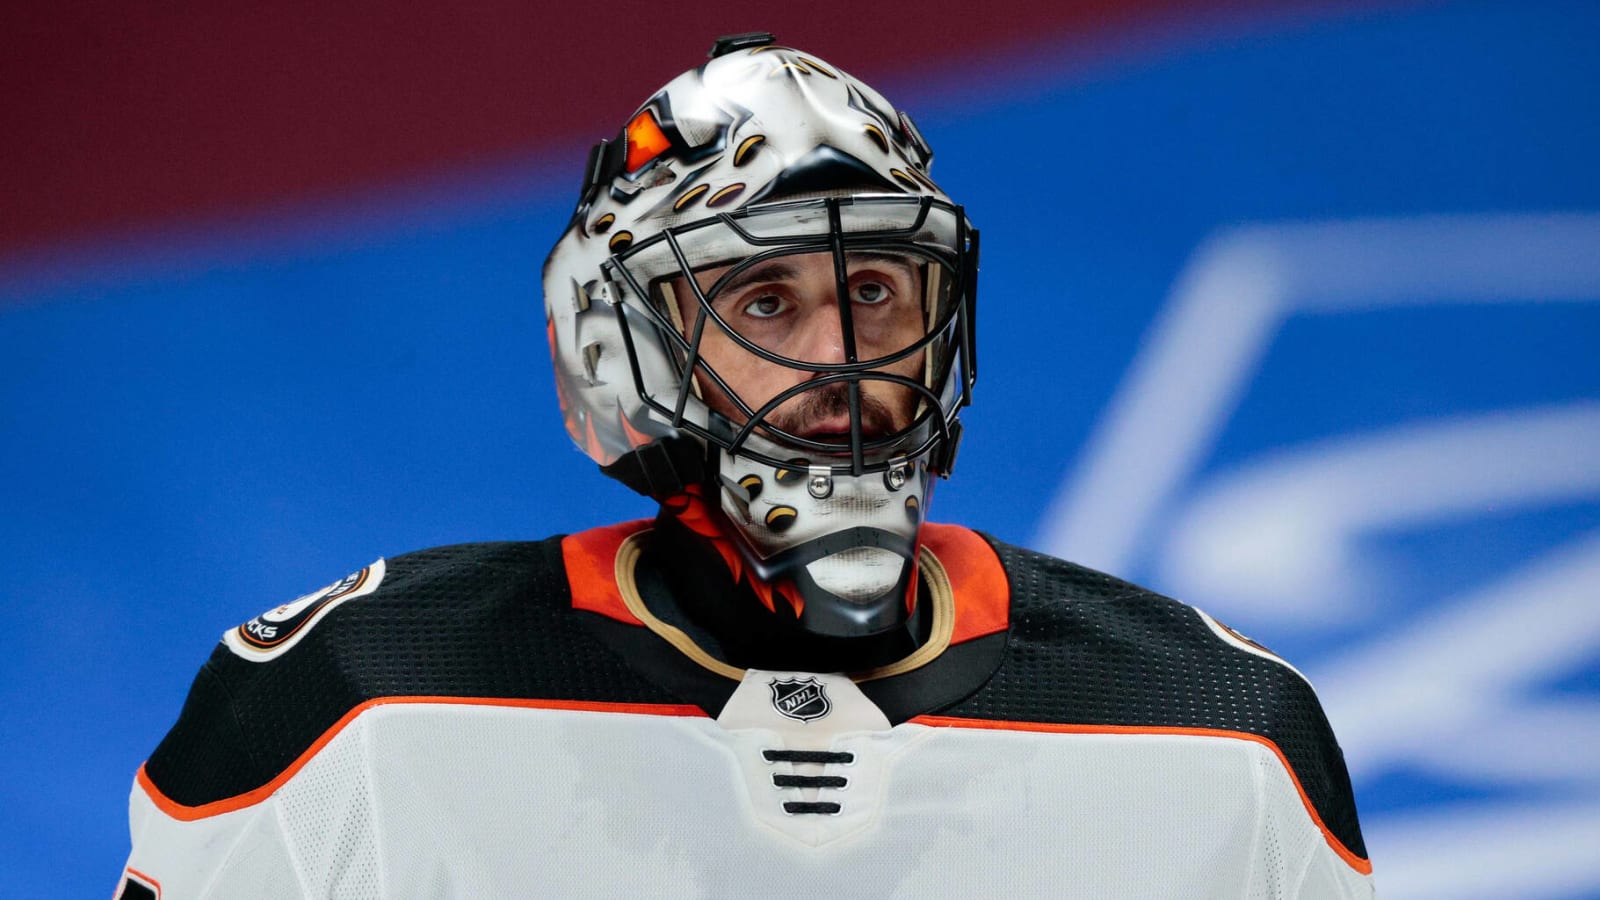 Ryan Miller reflects on being a cautionary deadline tale